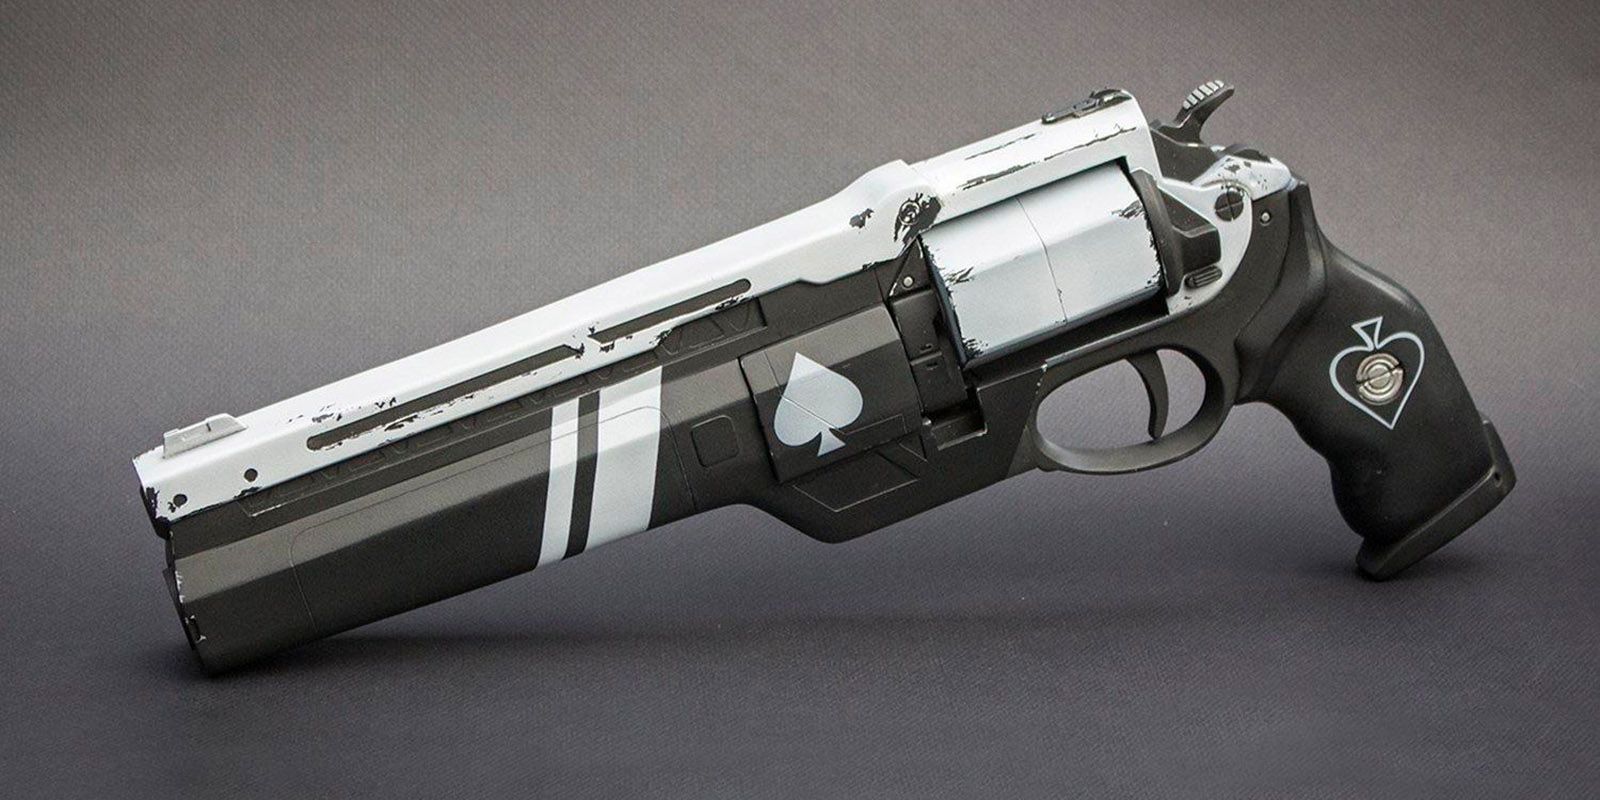 Destiny 2 Ace of Spades Exotic Hand Cannon